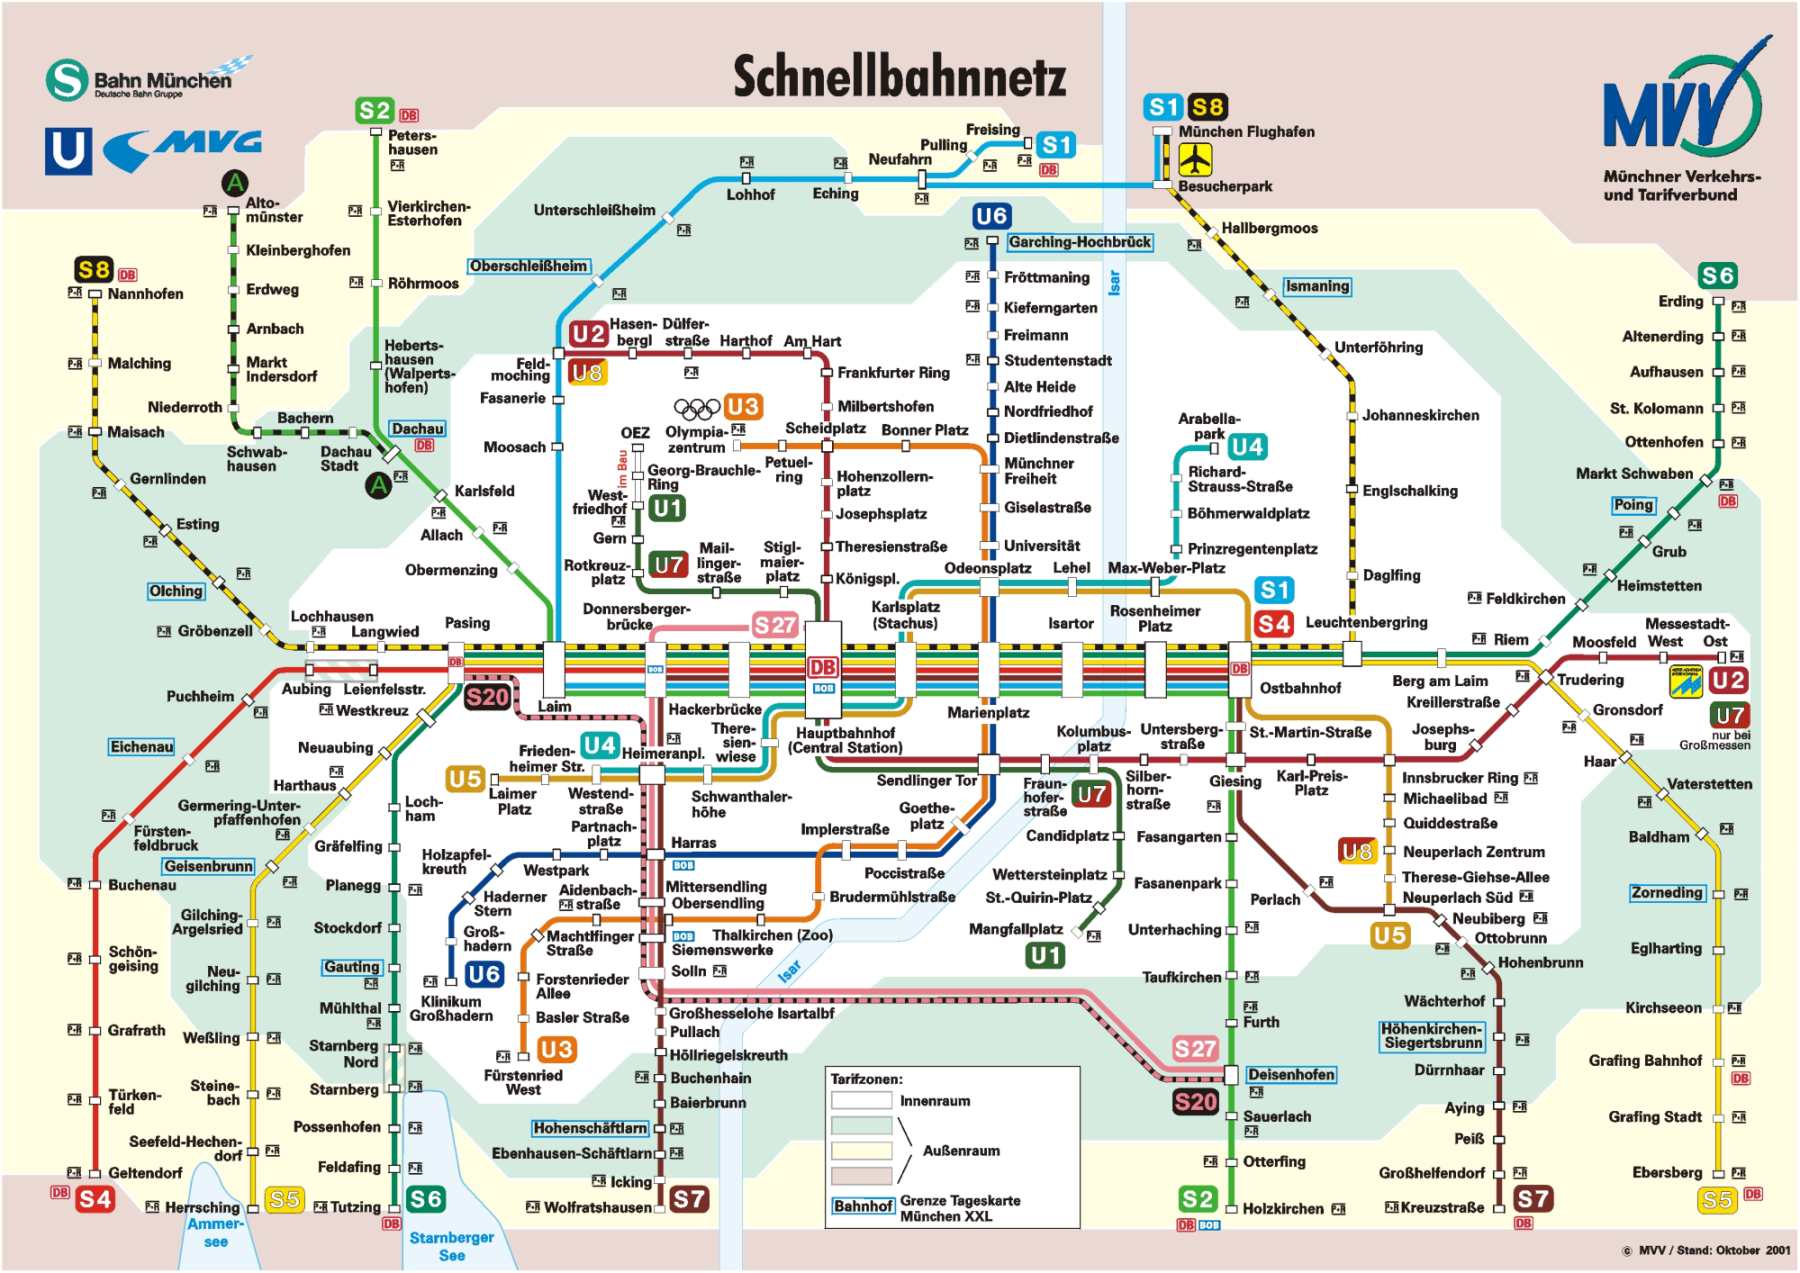 High quality map of the Munich Transport system